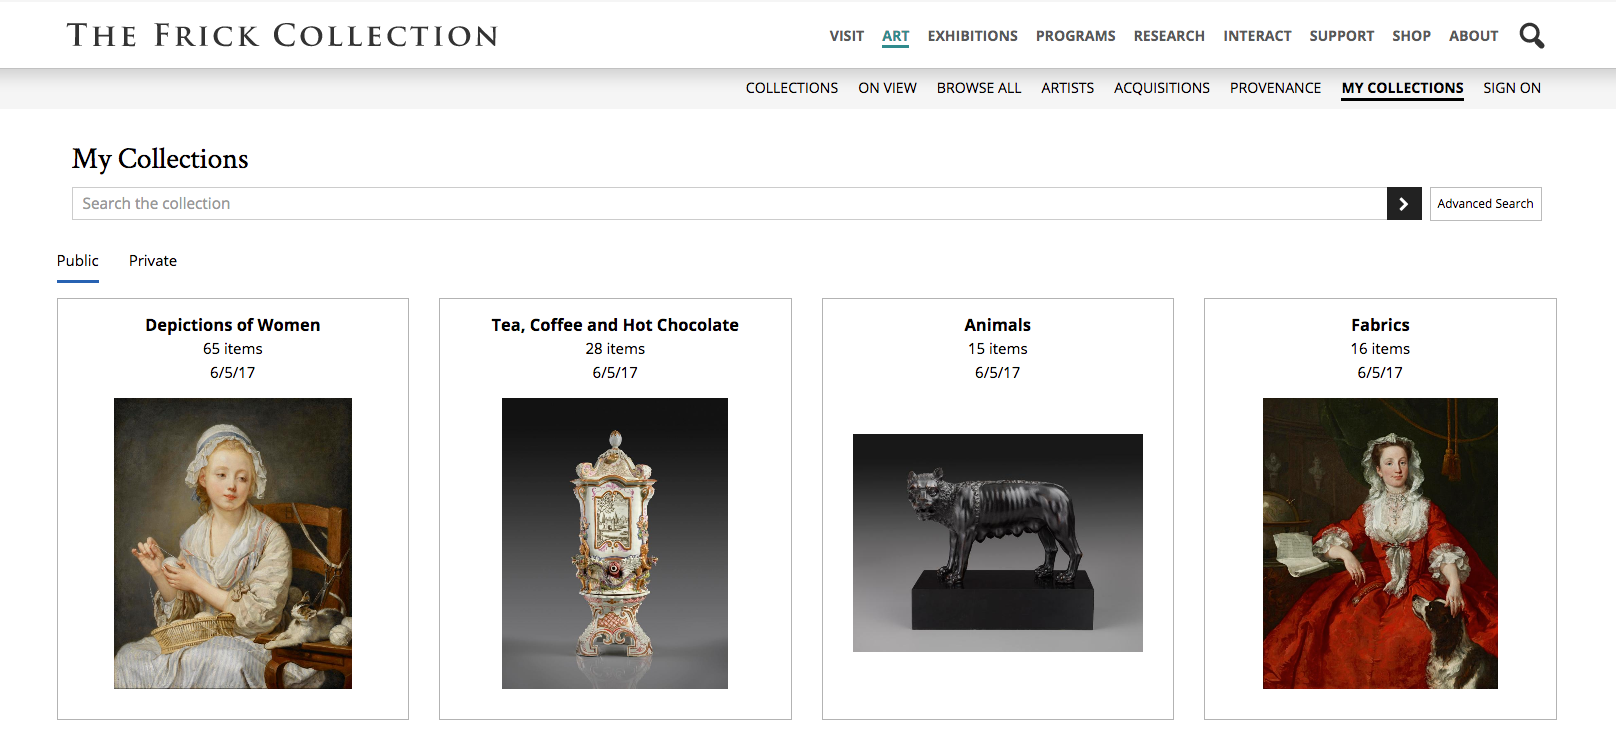 Screenshot of the the My Collections section of the Frick website. There are a set of 4 collections.